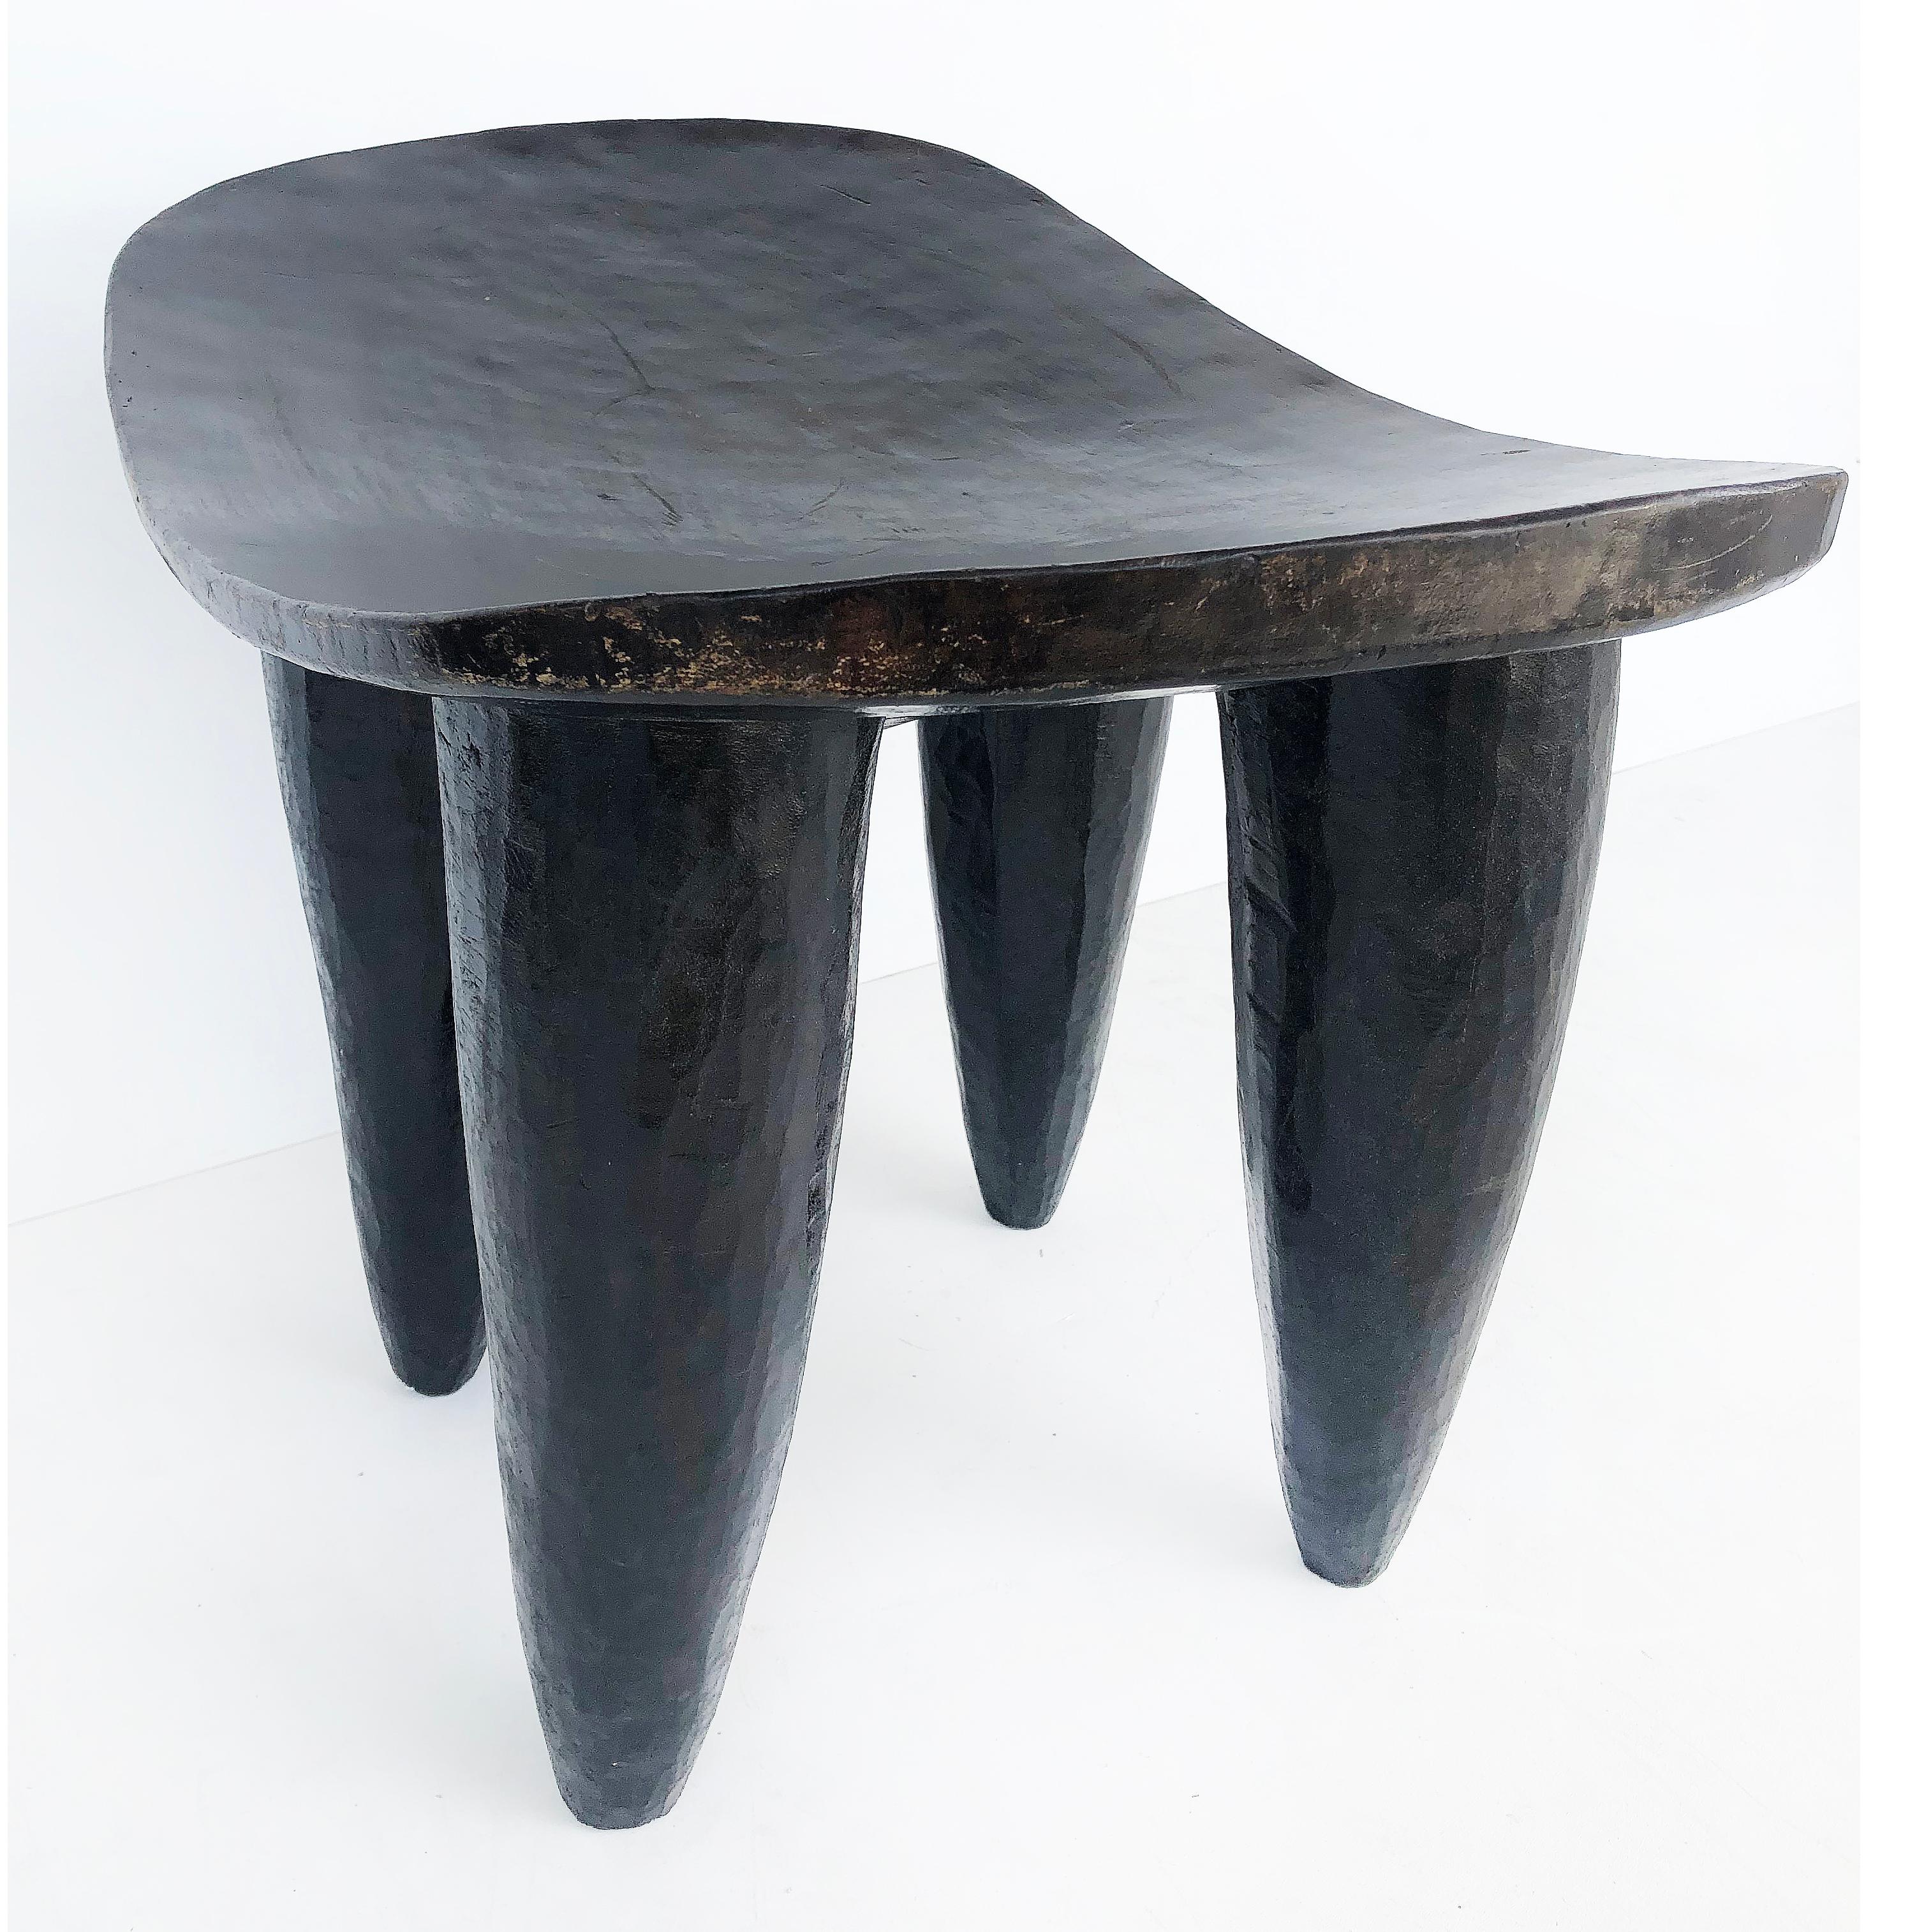 Wood African Hand Carved Senufo Stool from Cote d'Ivoire